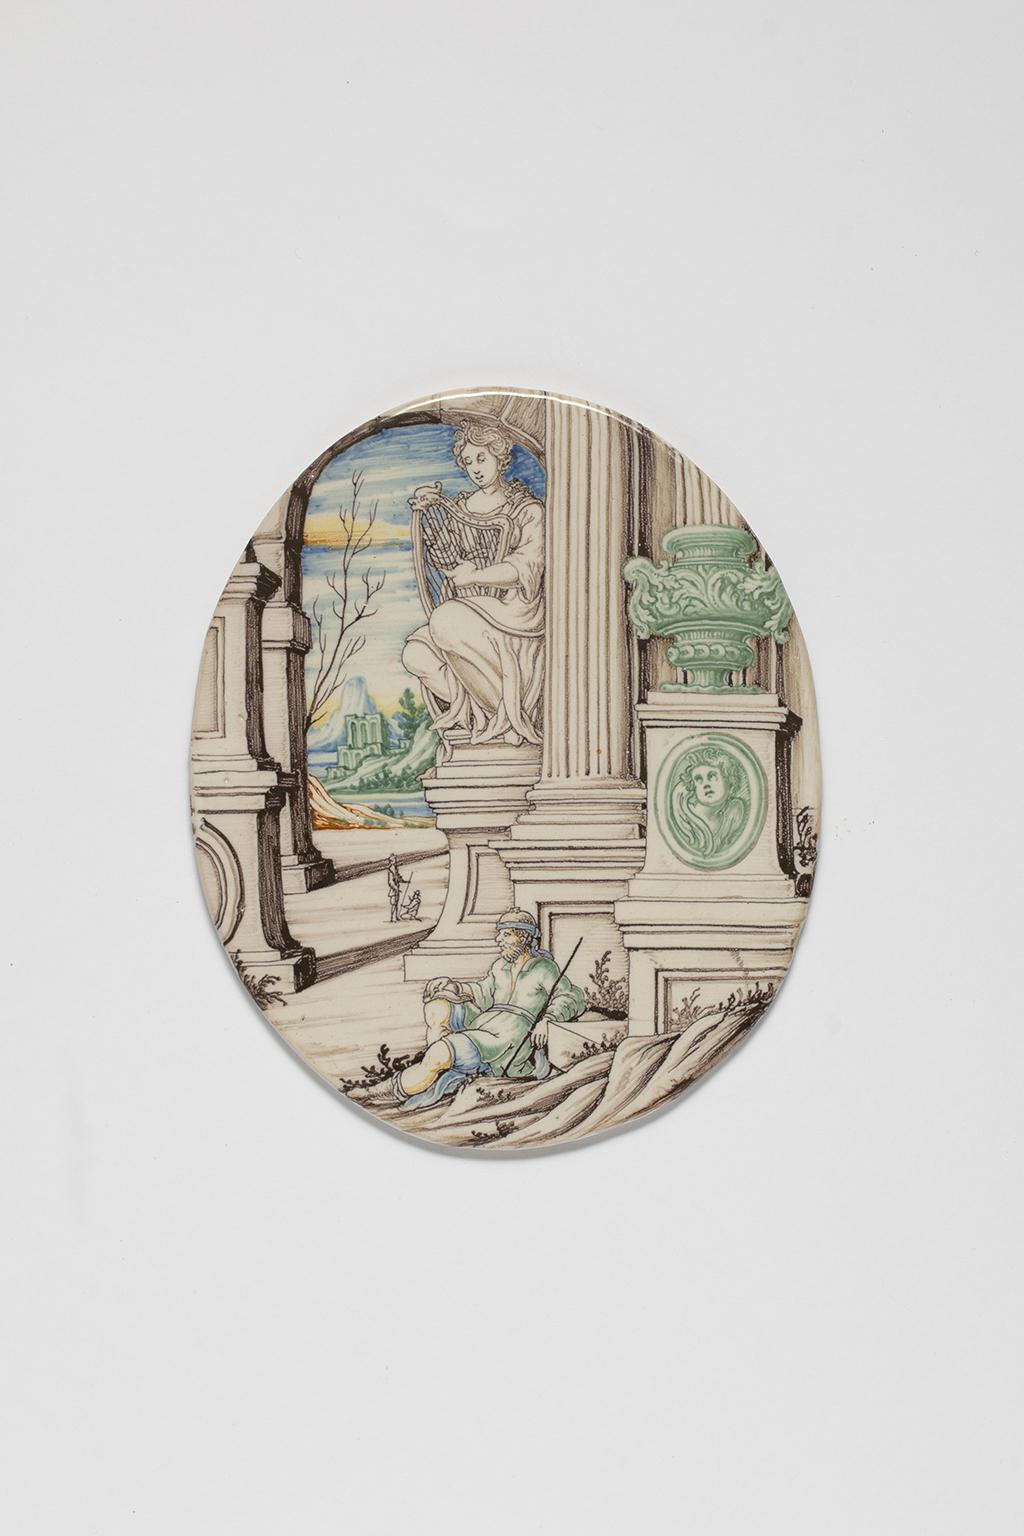 Ancient Maiolica Tiles, Rampini Manufactory, Pavia, 1693-1704 In Excellent Condition For Sale In Milano, IT